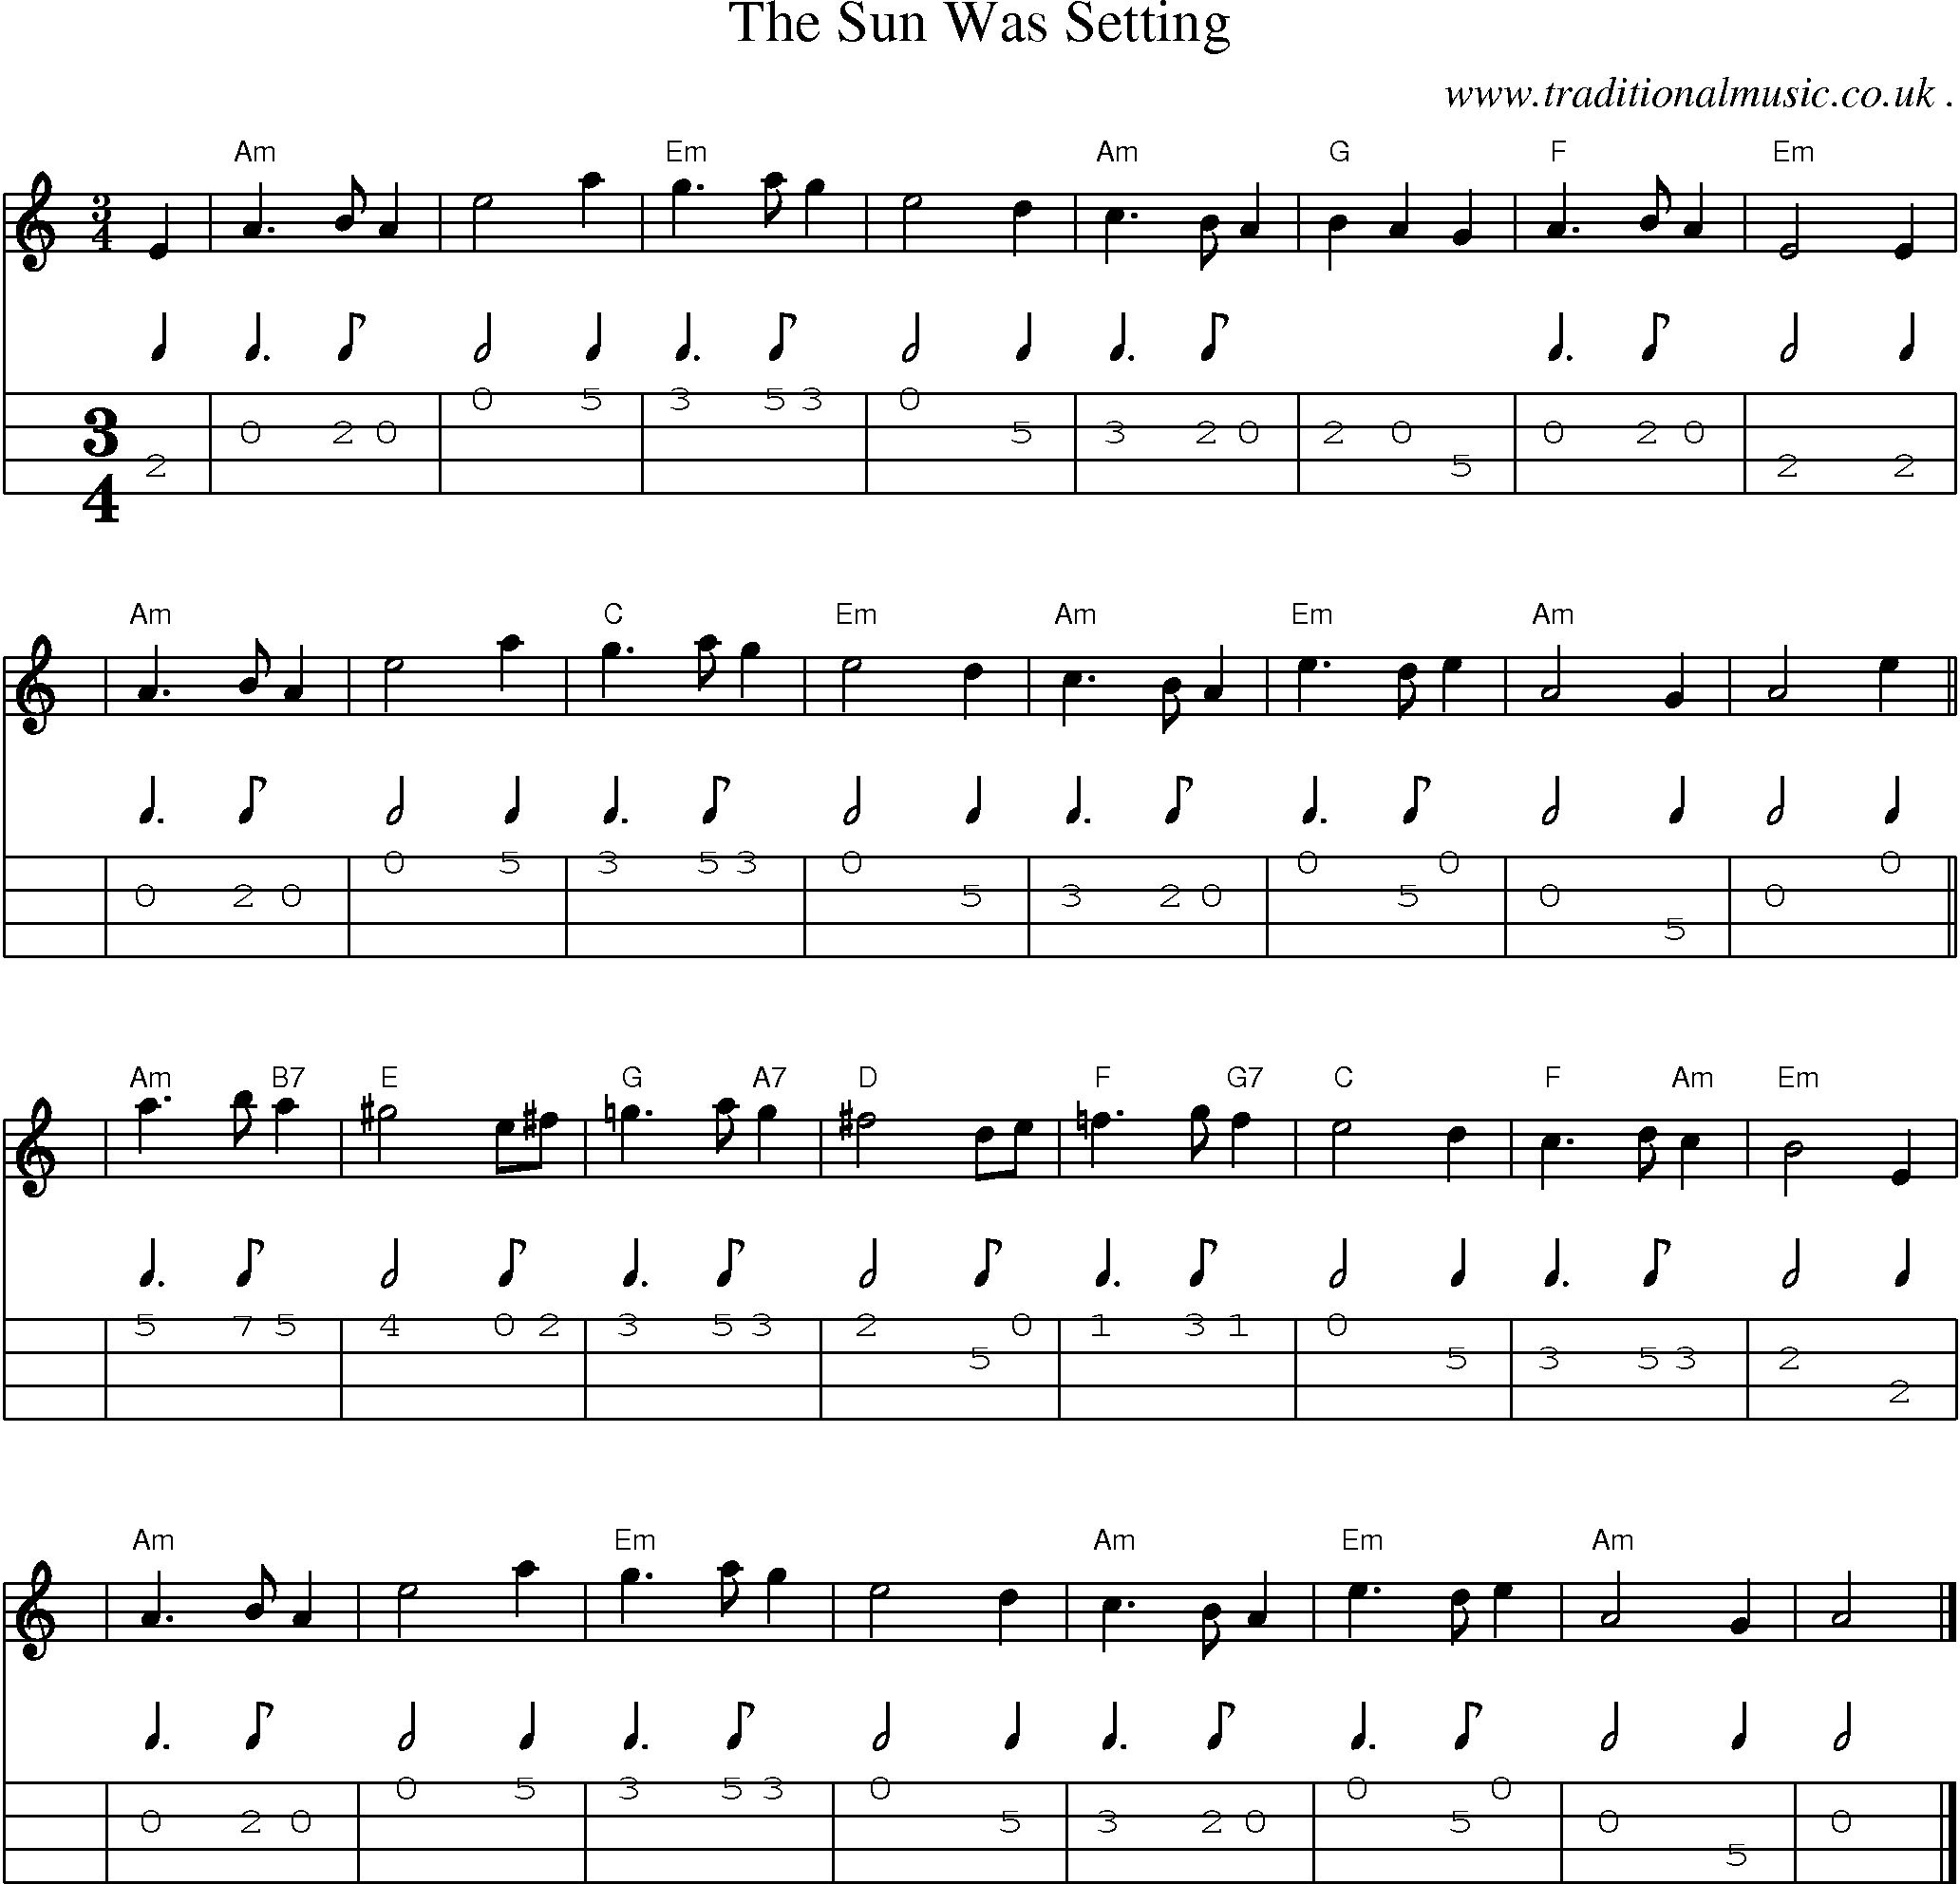 Sheet-music  score, Chords and Mandolin Tabs for The Sun Was Setting